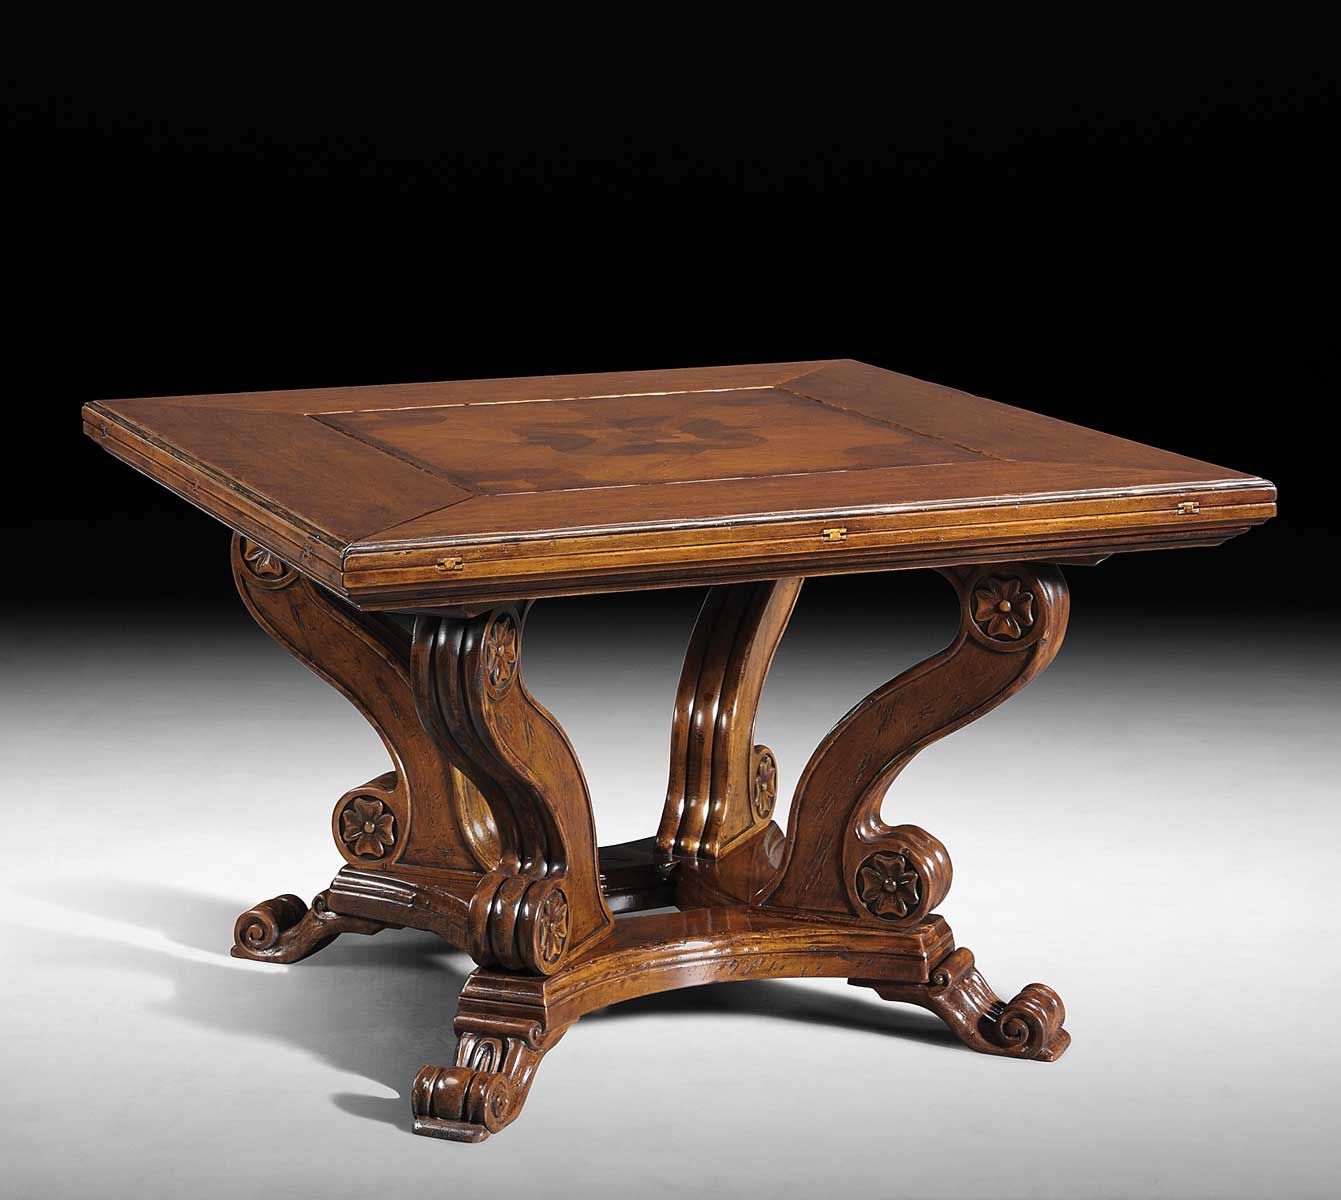 Gv 833 Folding Square To Octagonal Table – David Michael In Octagon Console Tables (View 3 of 20)